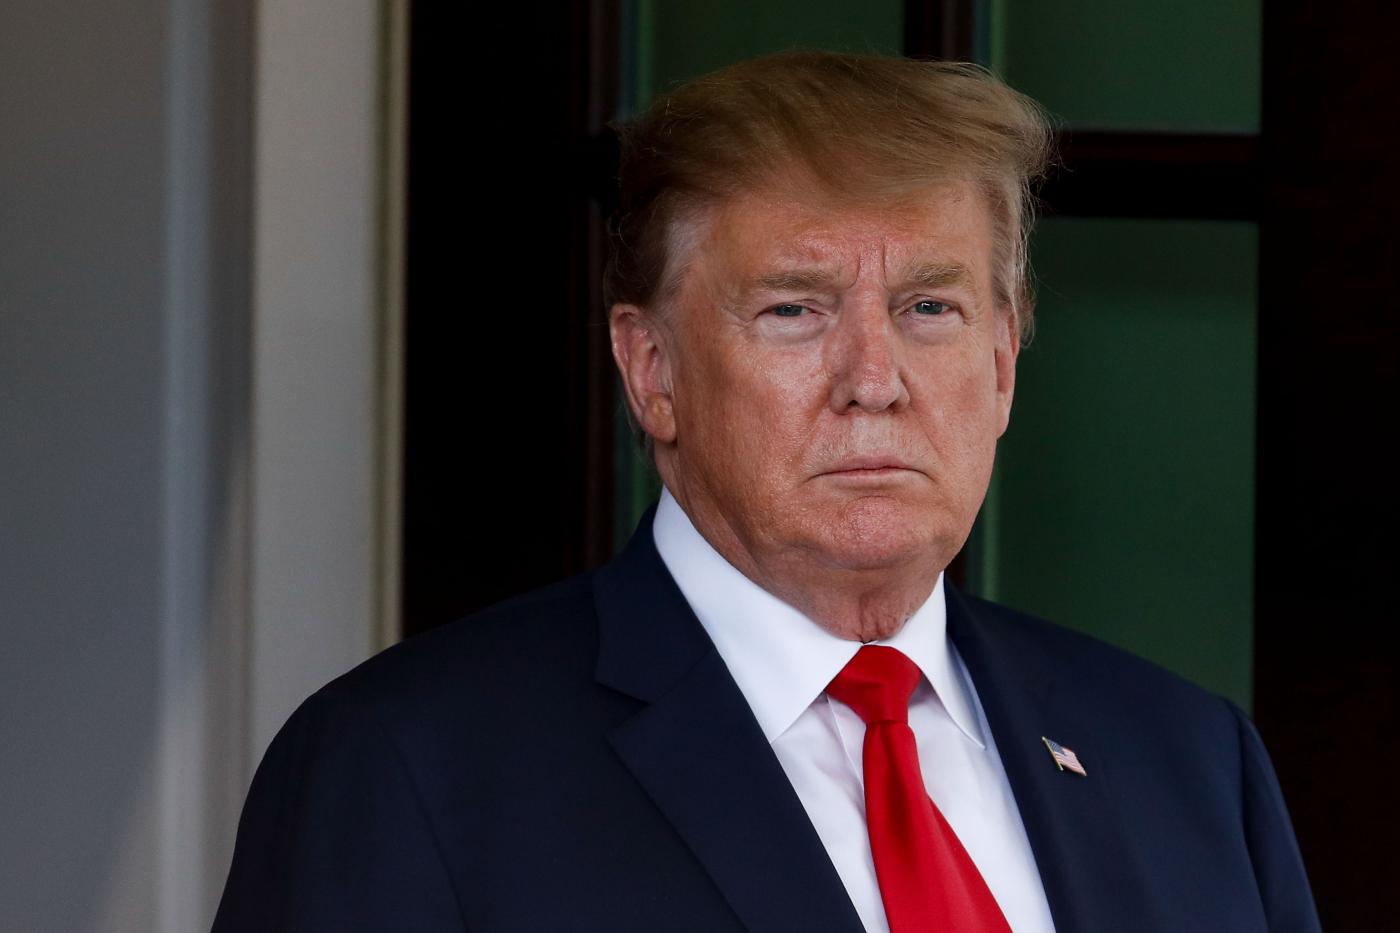 WASHINGTON, April 26, 2019 (Xinhua) -- U.S. President Donald Trump is pictured at the White House in Washington D.C., the United States, on April 26, 2019. Trump announced on Friday that the United States is withdrawing from an international arms trade treaty signed by the Obama administration, marking Washington's latest exit from an international pact. (Xinhua/Ting Shen/IANS) by Ting Shen.